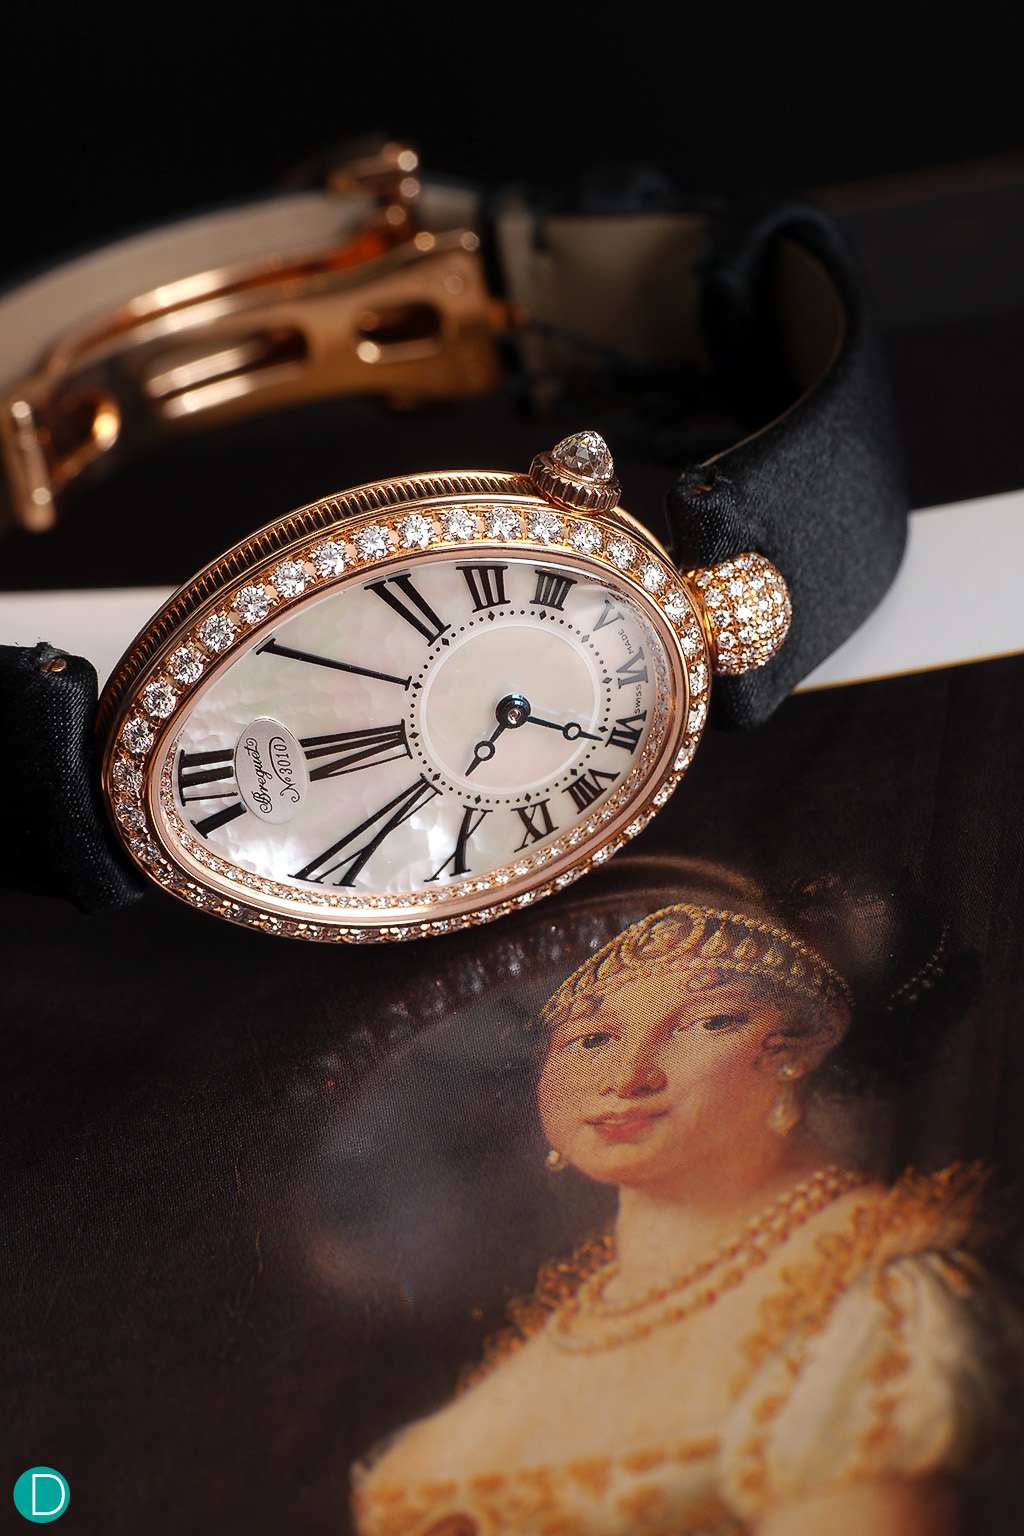 The Queen of Naples, a modern interpretation of the first wristwatch A.L. Breguet created for the Queen of Naples in 1850. 